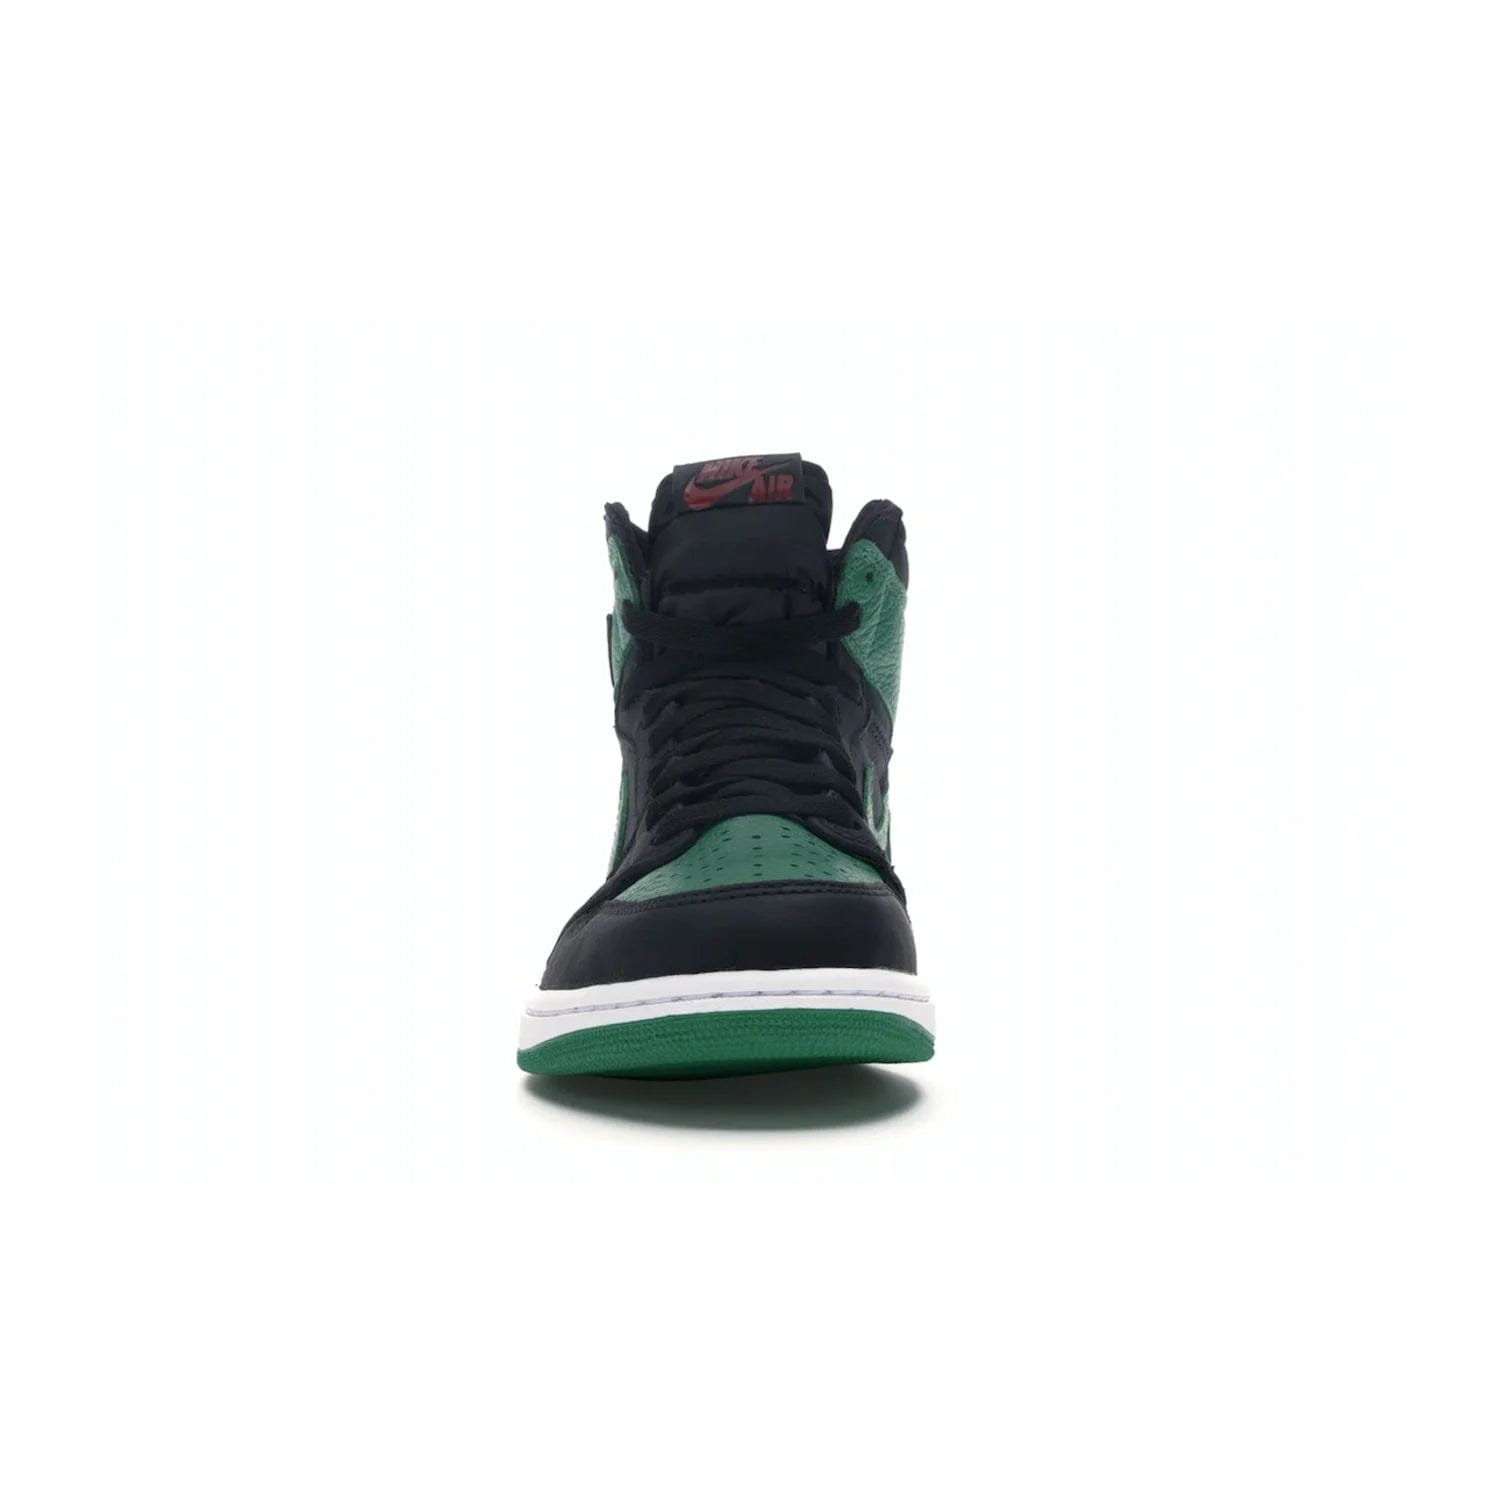 Jordan 1 Retro High Pine Green Black - Image 10 - Only at www.BallersClubKickz.com - Step into fresh style with the Jordan 1 Retro High Pine Green Black. Combining a black tumbled leather upper with green leather overlays, this sneaker features a Gym Red embroidered tongue tag, sail midsole, and pine green outsole for iconic style with a unique twist.